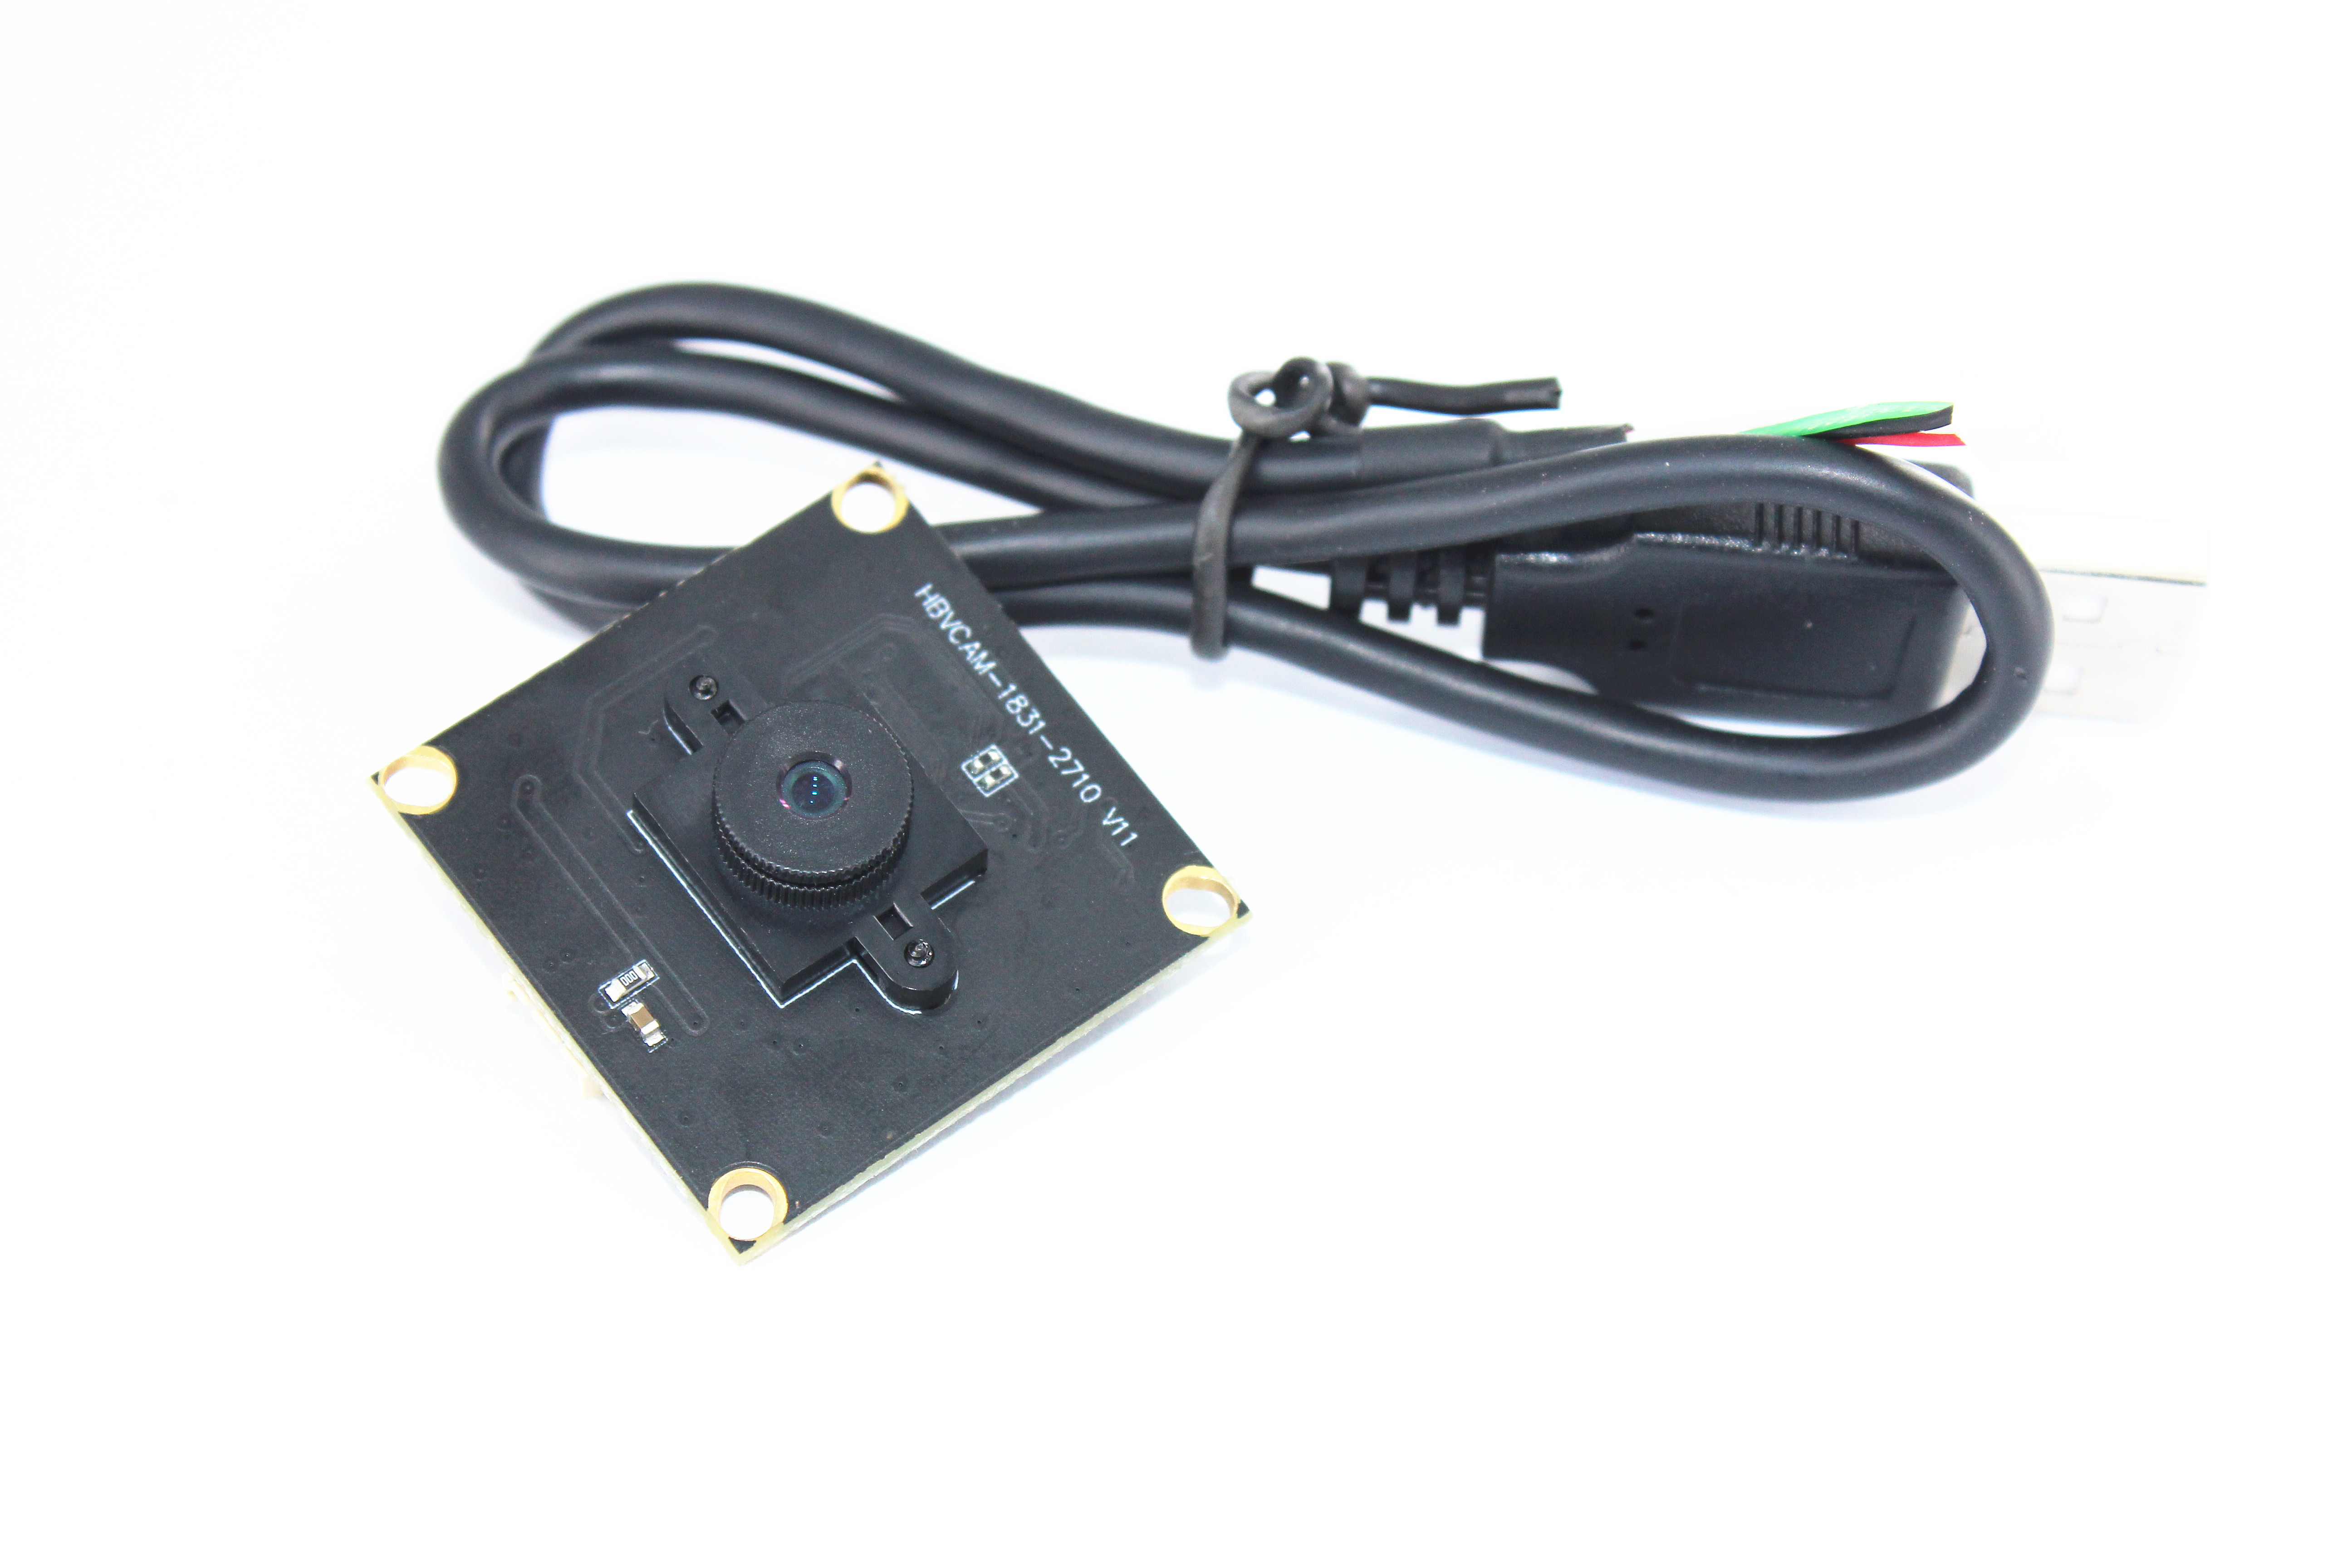 2Megapixel 1080P HD 30FPS USB Camera Module with Free driver